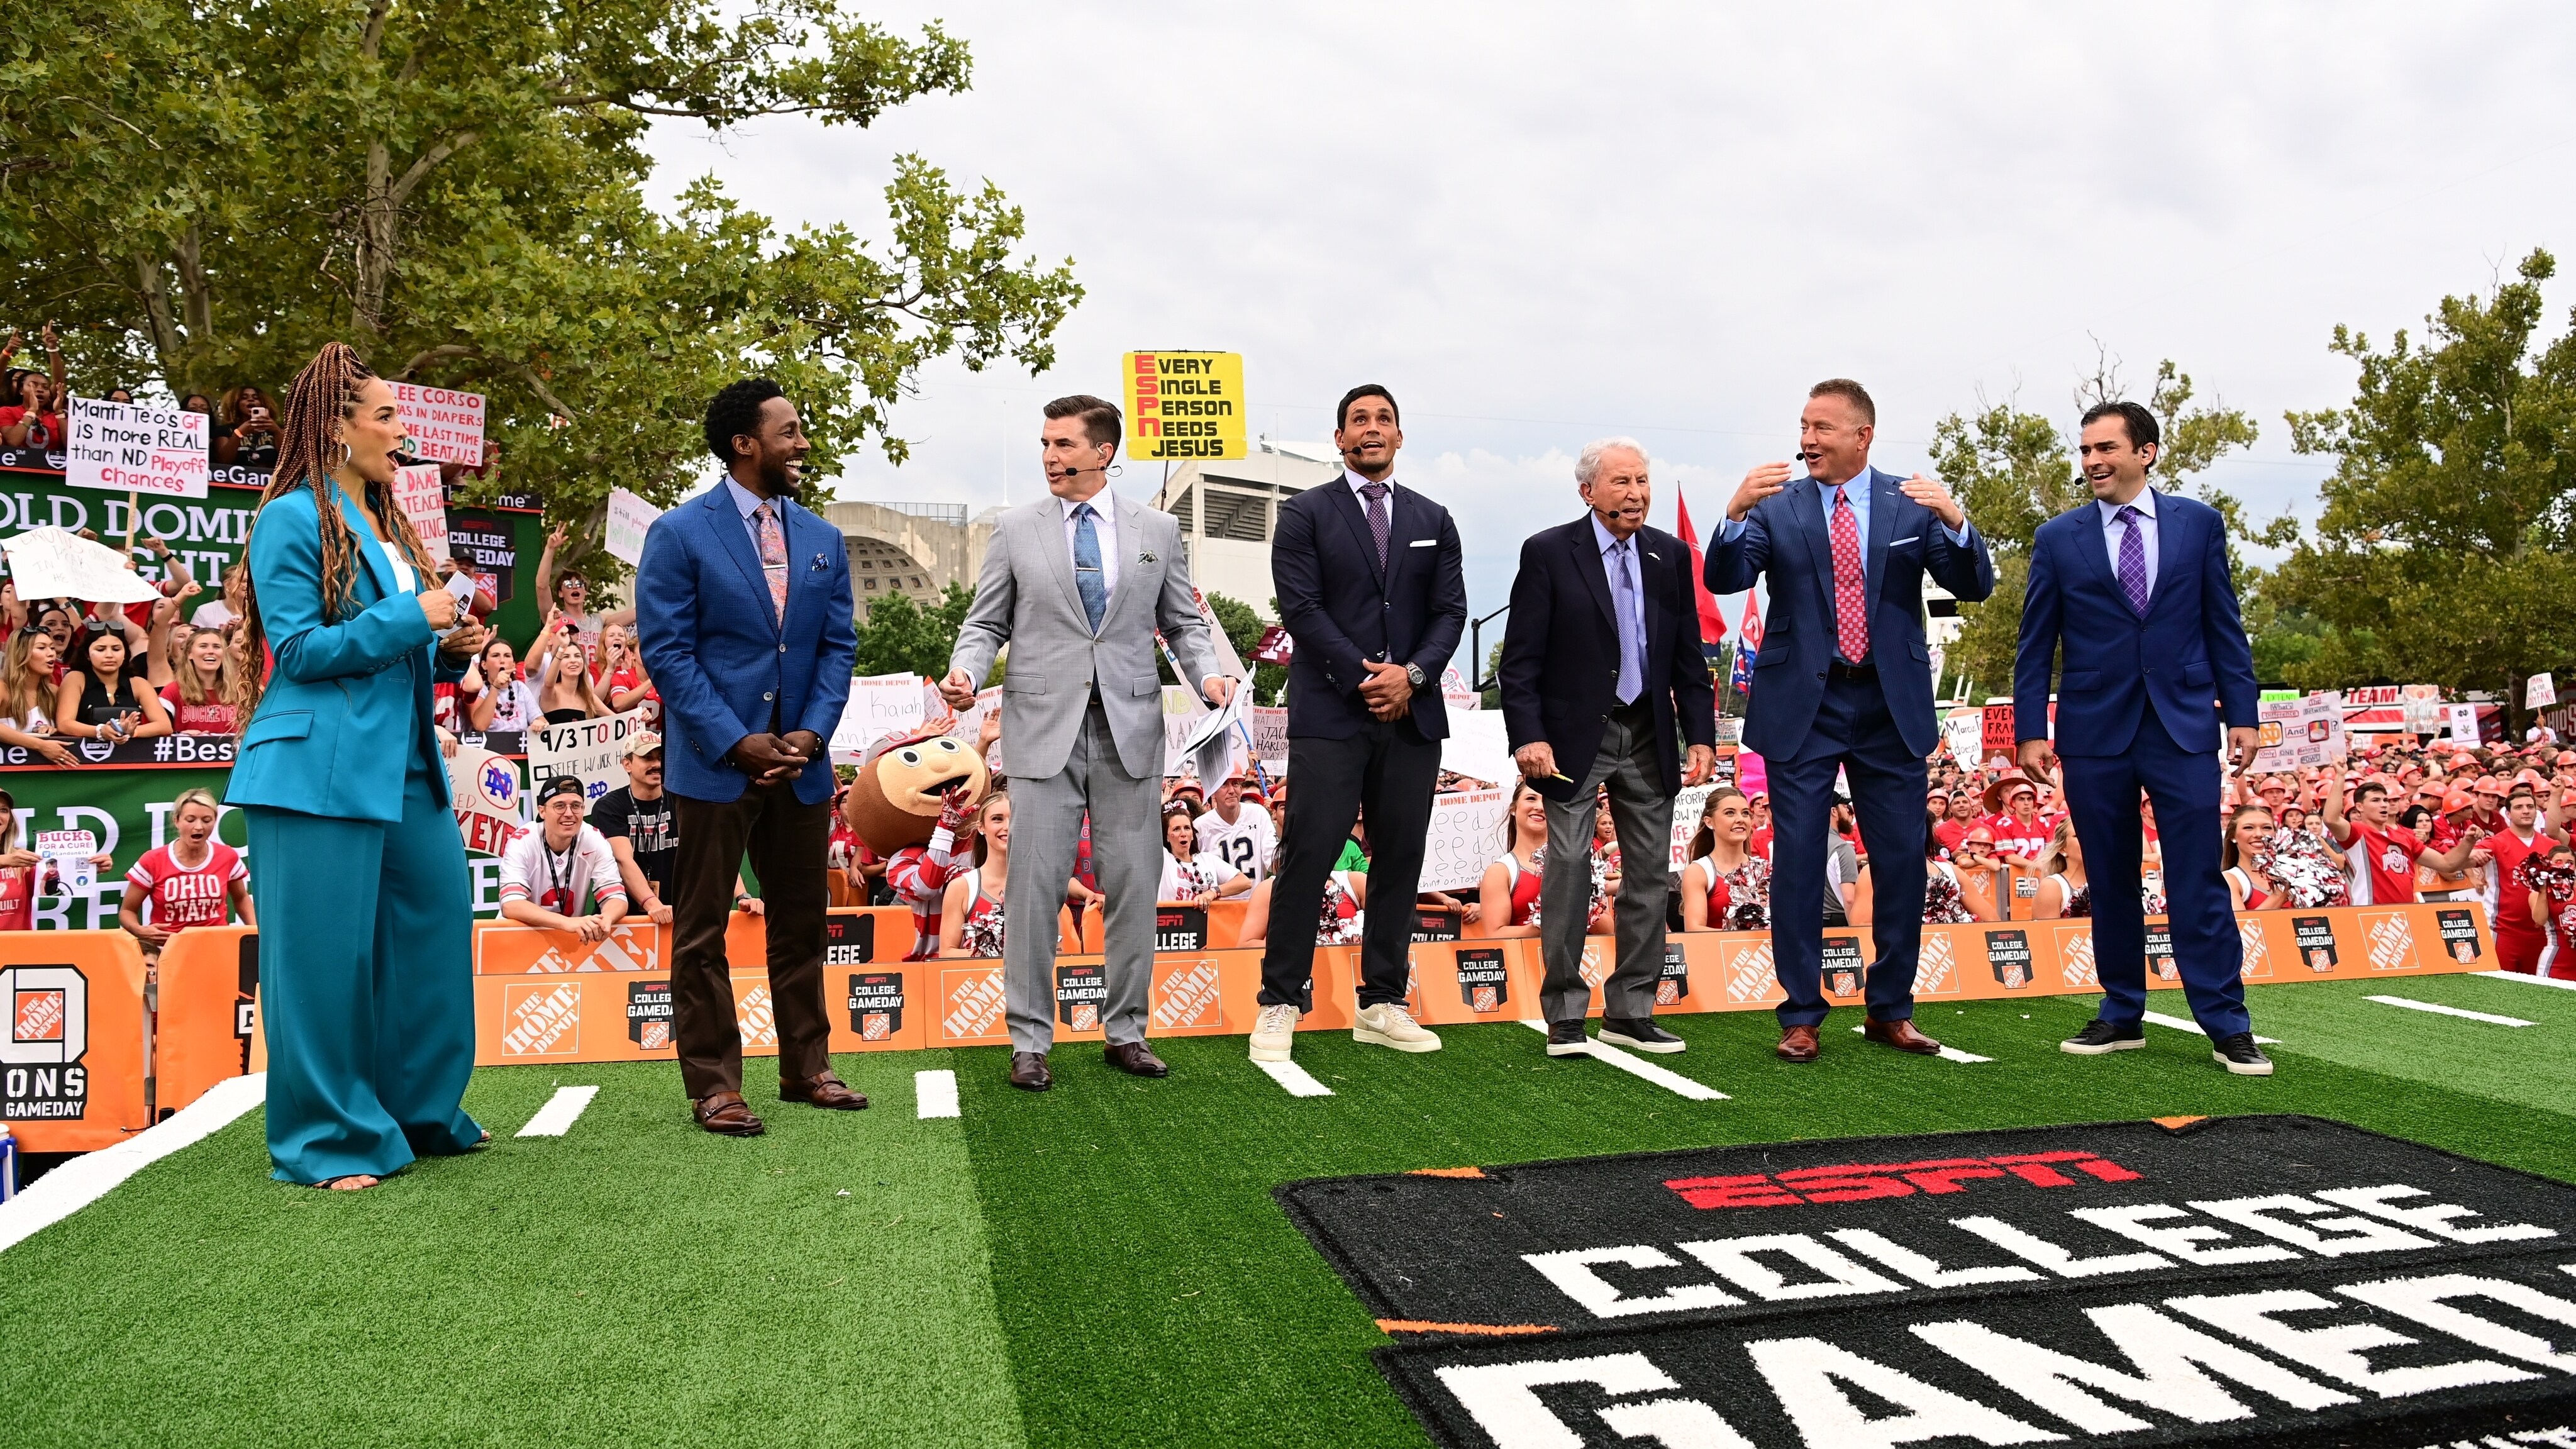 Disney Adverting Hits the Road for 2022-23 College Football Season with Strong Slate of College GameDay Built by The Home Depot Sponsors